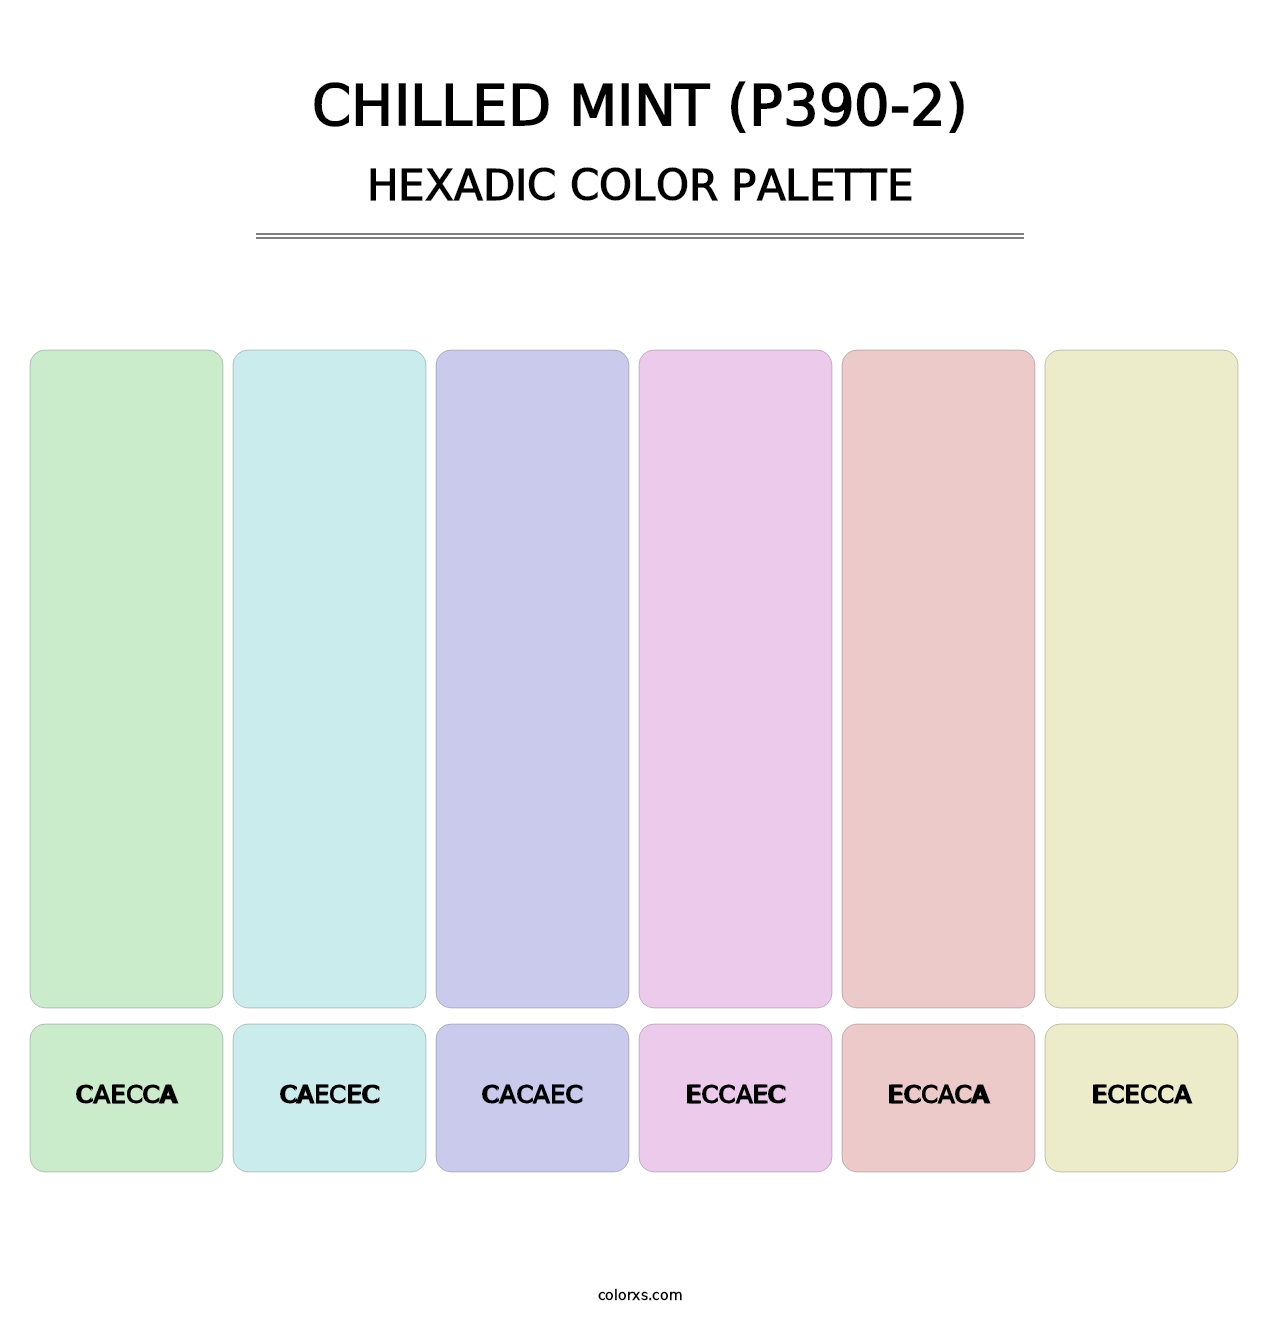 Chilled Mint (P390-2) - Hexadic Color Palette